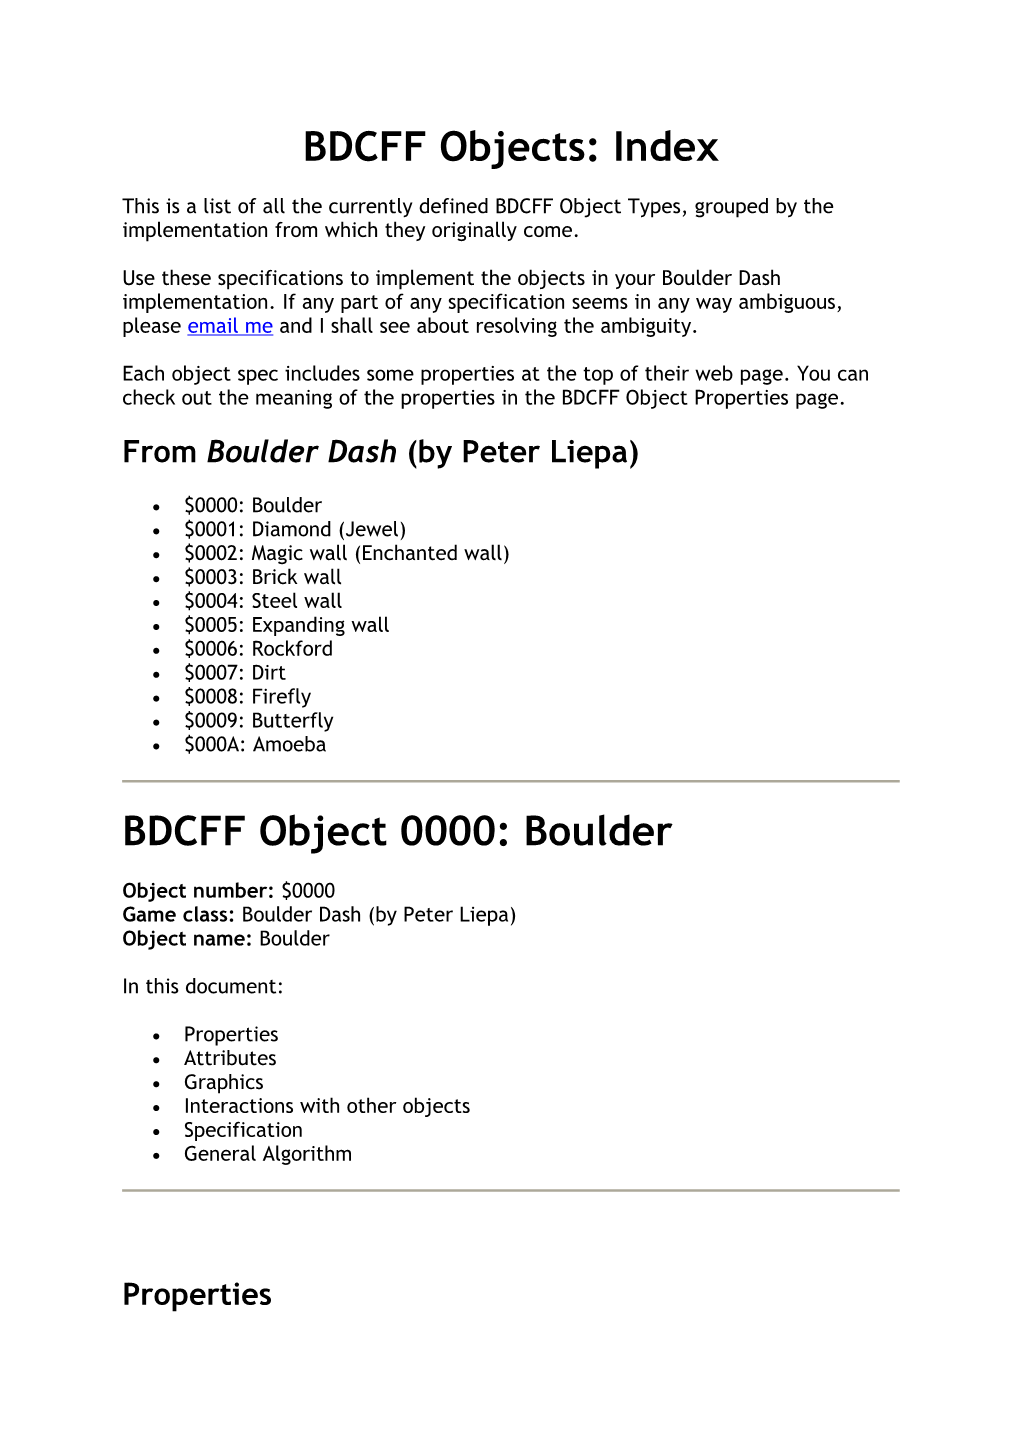 BDCFF Objects: Index